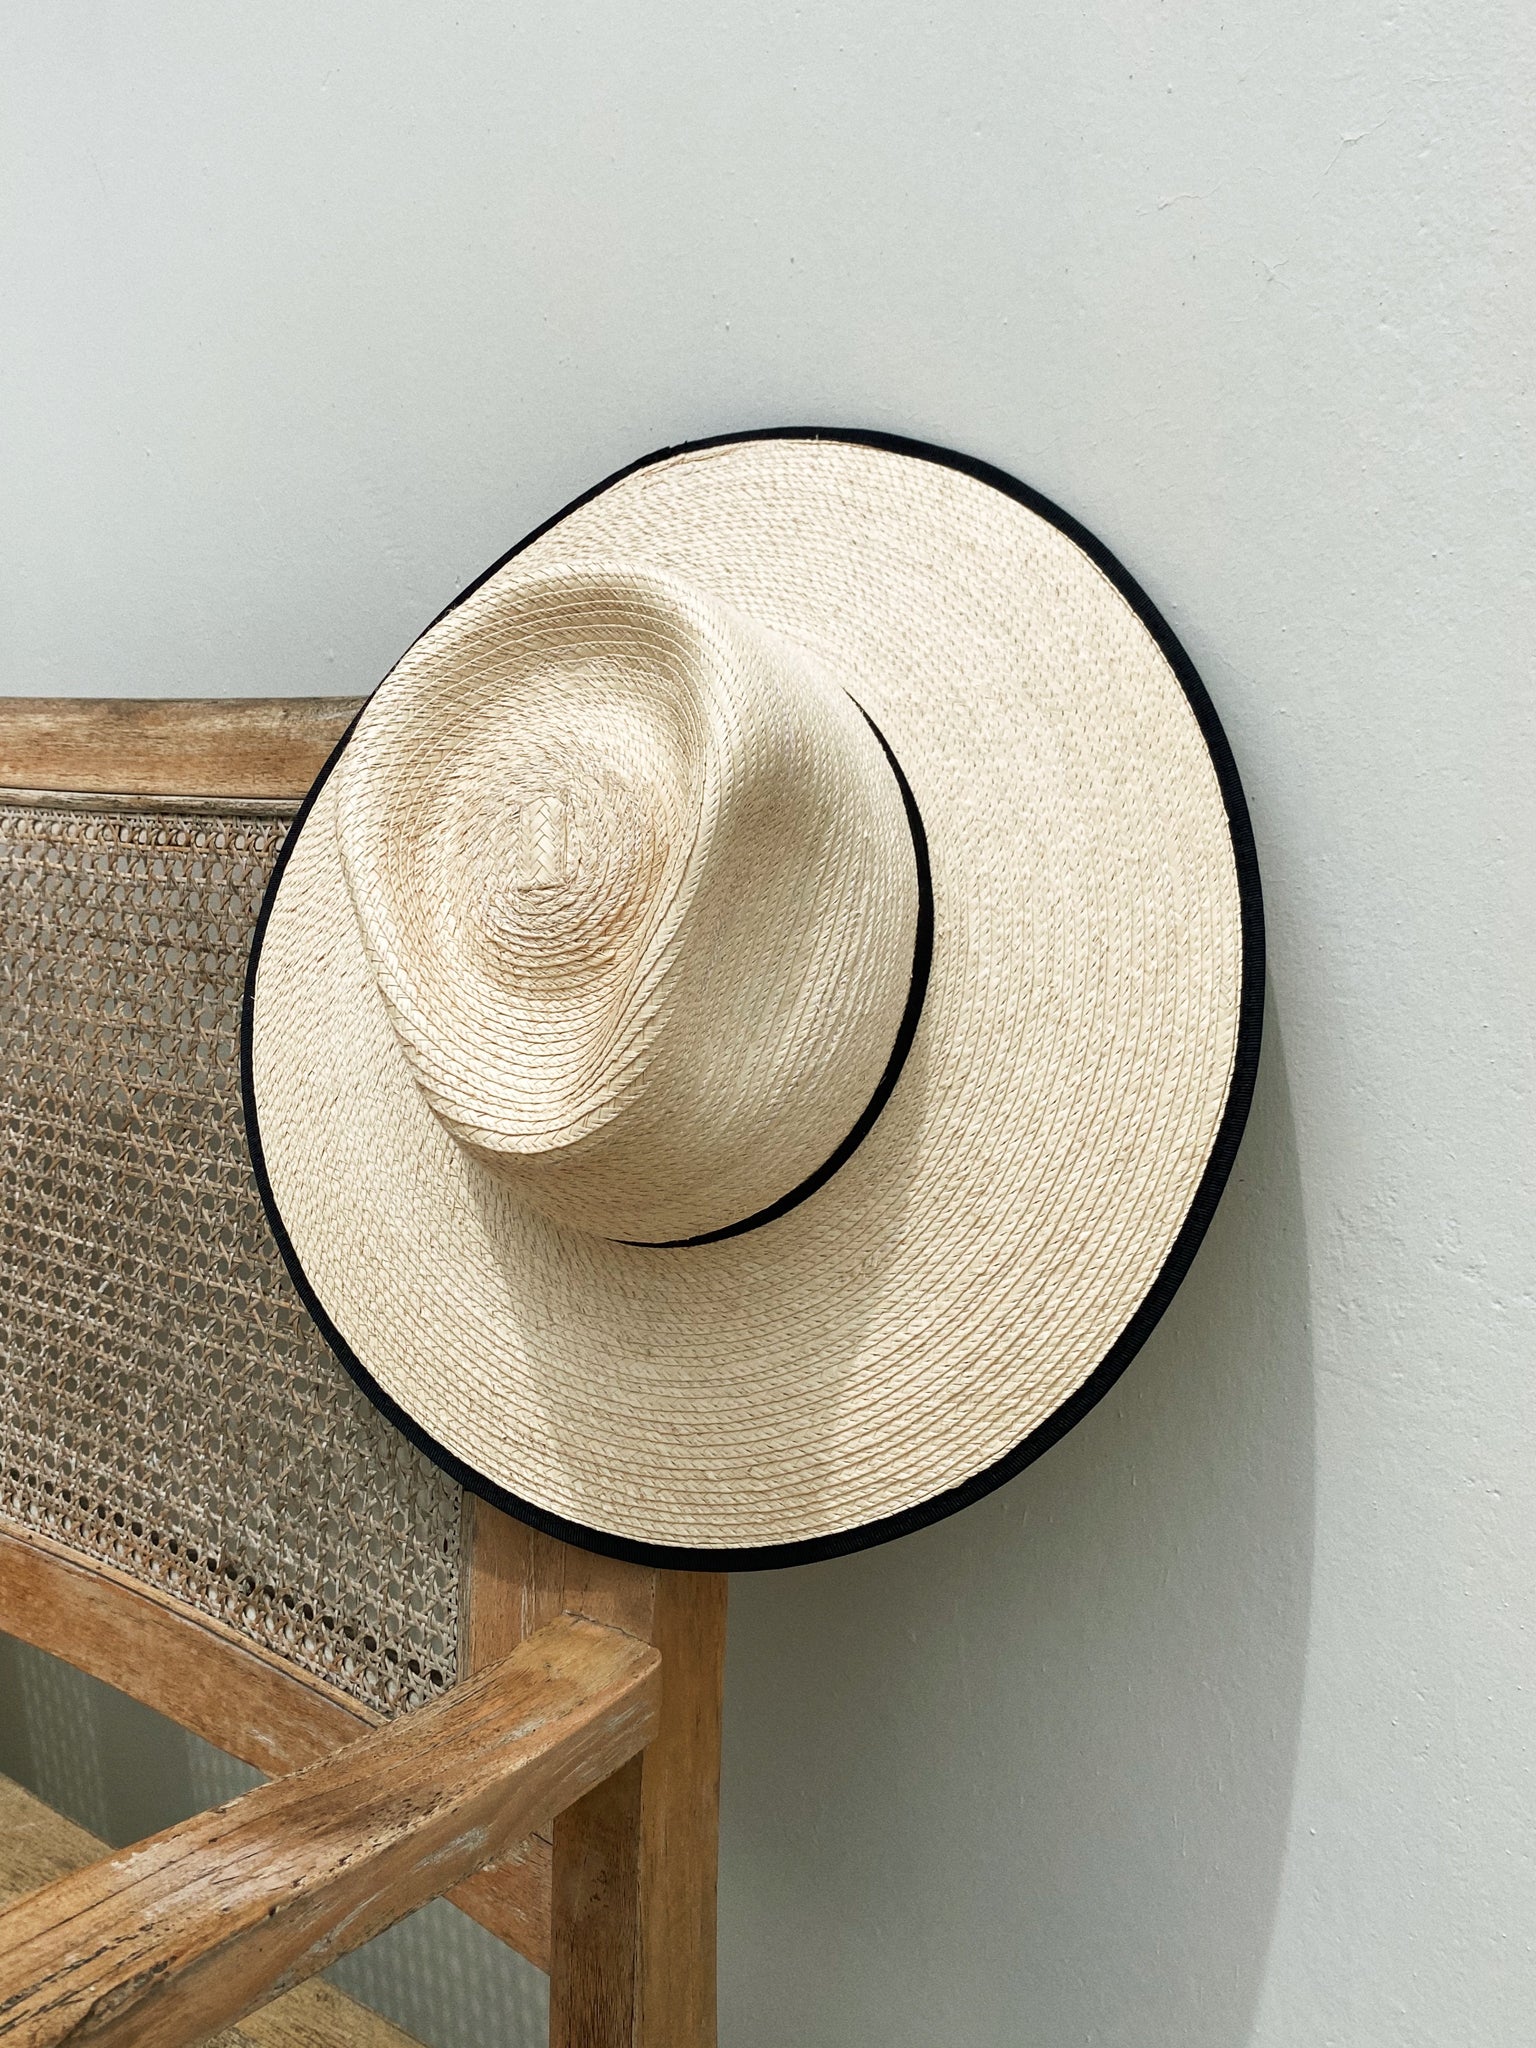 The Clay Straw Fedora – Stitch And Feather